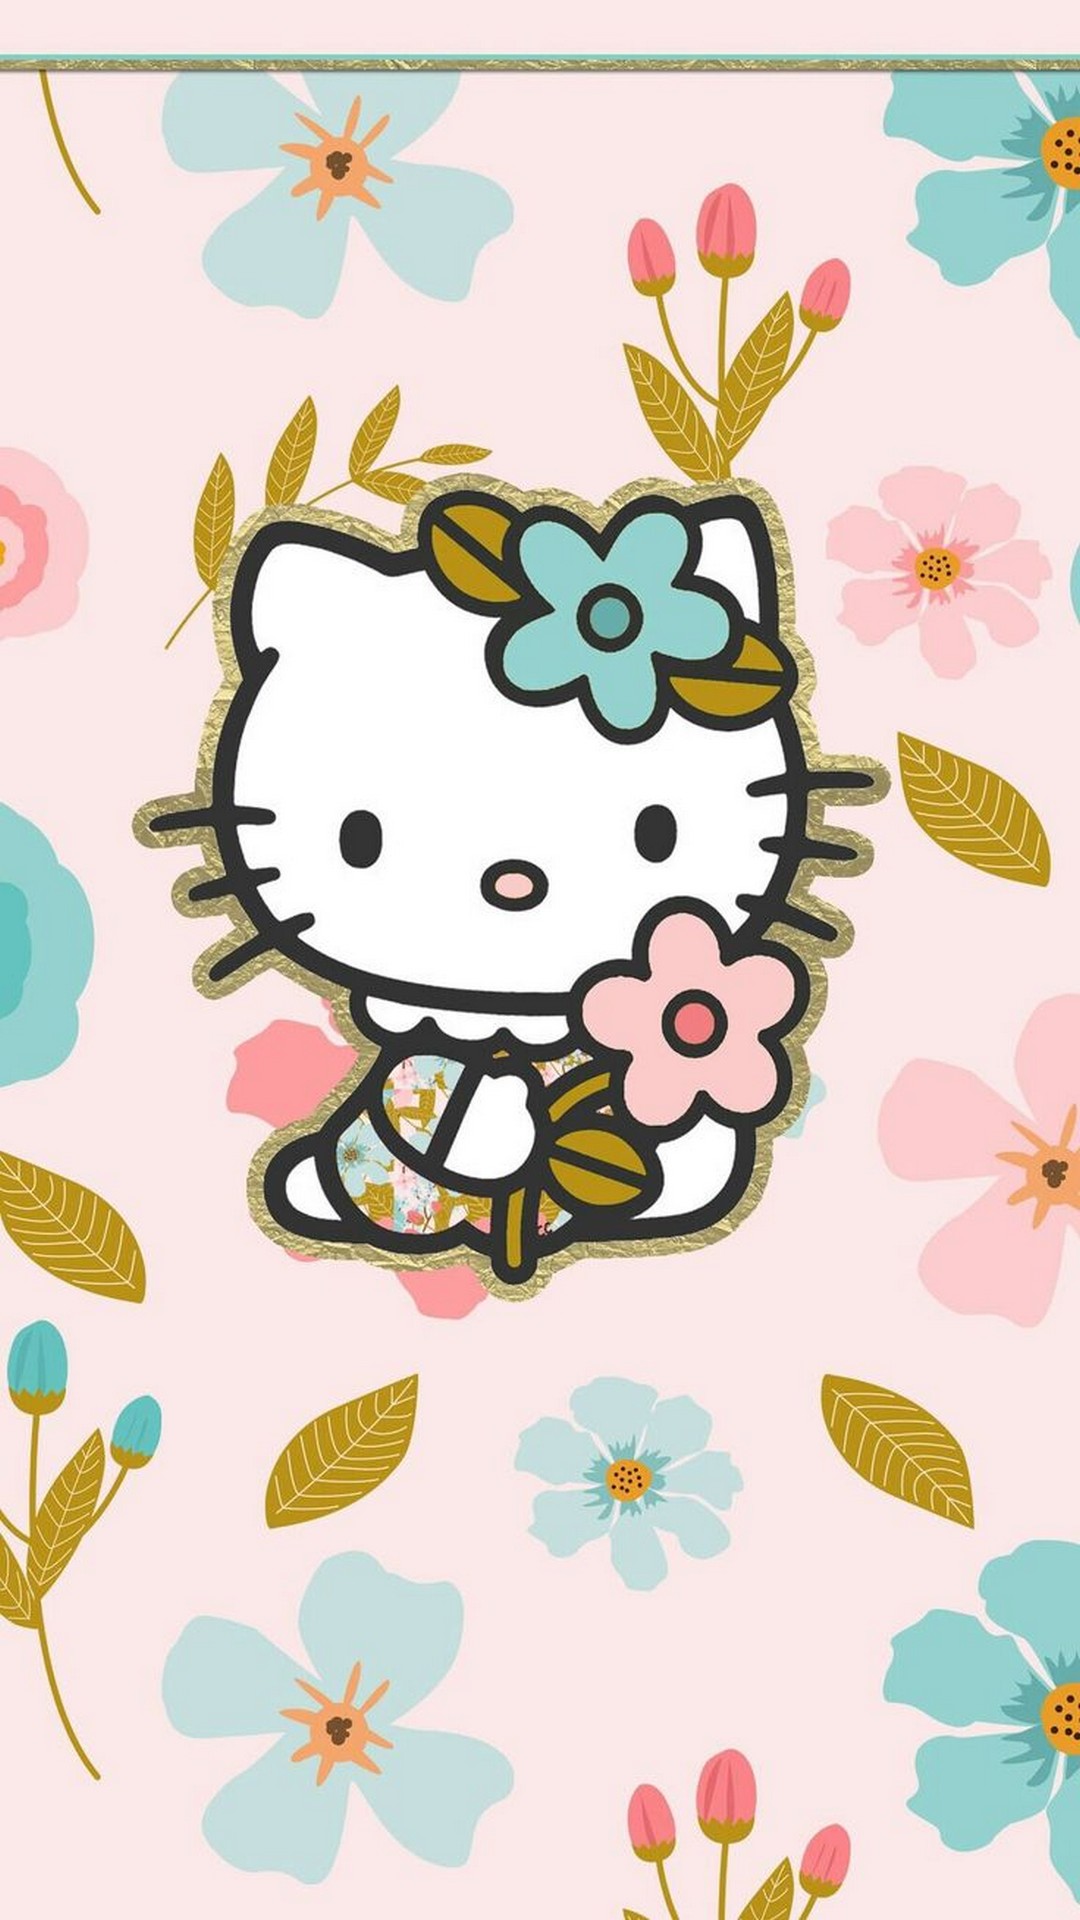 Hello Kitty Wallpaper iPhone with resolution 1080X1920 pixel. You can make this wallpaper for your iPhone 5, 6, 7, 8, X backgrounds, Mobile Screensaver, or iPad Lock Screen